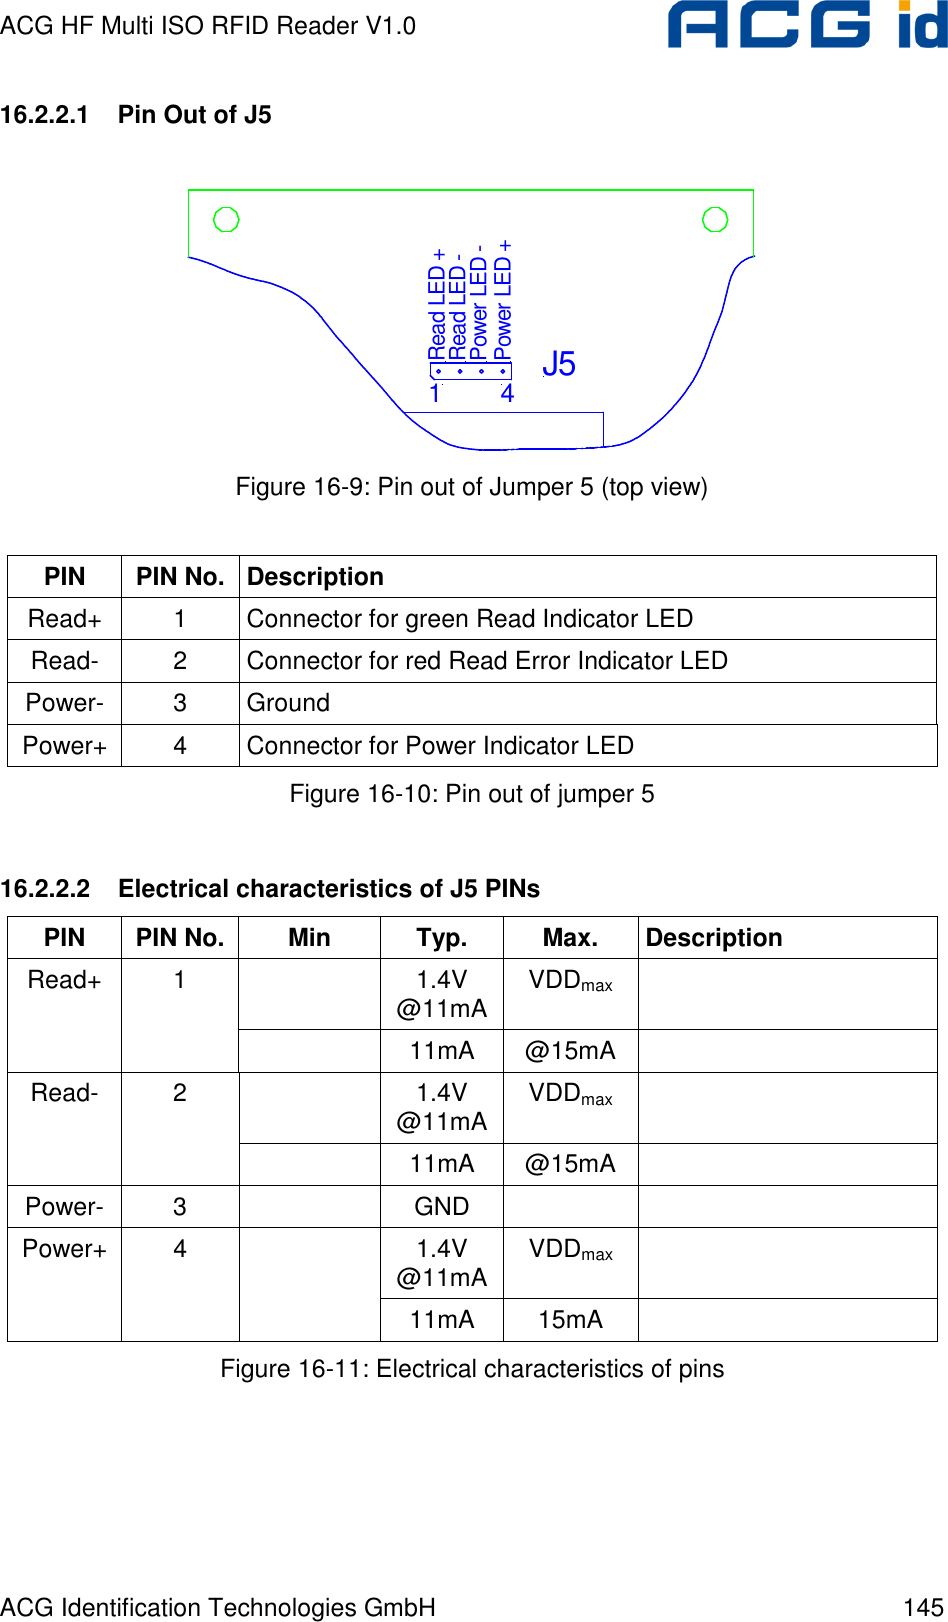 ACG HF Multi ISO RFID Reader V1.0 ACG Identification Technologies GmbH  145 16.2.2.1  Pin Out of J5  J5Read LED +Read LED -Power LED +Power LED -14  Figure 16-9: Pin out of Jumper 5 (top view)  PIN  PIN No.  Description Read+  1  Connector for green Read Indicator LED Read-  2  Connector for red Read Error Indicator LED Power-  3  Ground Power+ 4  Connector for Power Indicator LED Figure 16-10: Pin out of jumper 5  16.2.2.2  Electrical characteristics of J5 PINs PIN  PIN No. Min  Typ.  Max.  Description   1.4V @11mA  VDDmax   Read+  1   11mA  @15mA     1.4V @11mA  VDDmax   Read-  2   11mA  @15mA   Power-  3    GND     1.4V @11mA  VDDmax   Power+ 4   11mA  15mA   Figure 16-11: Electrical characteristics of pins     